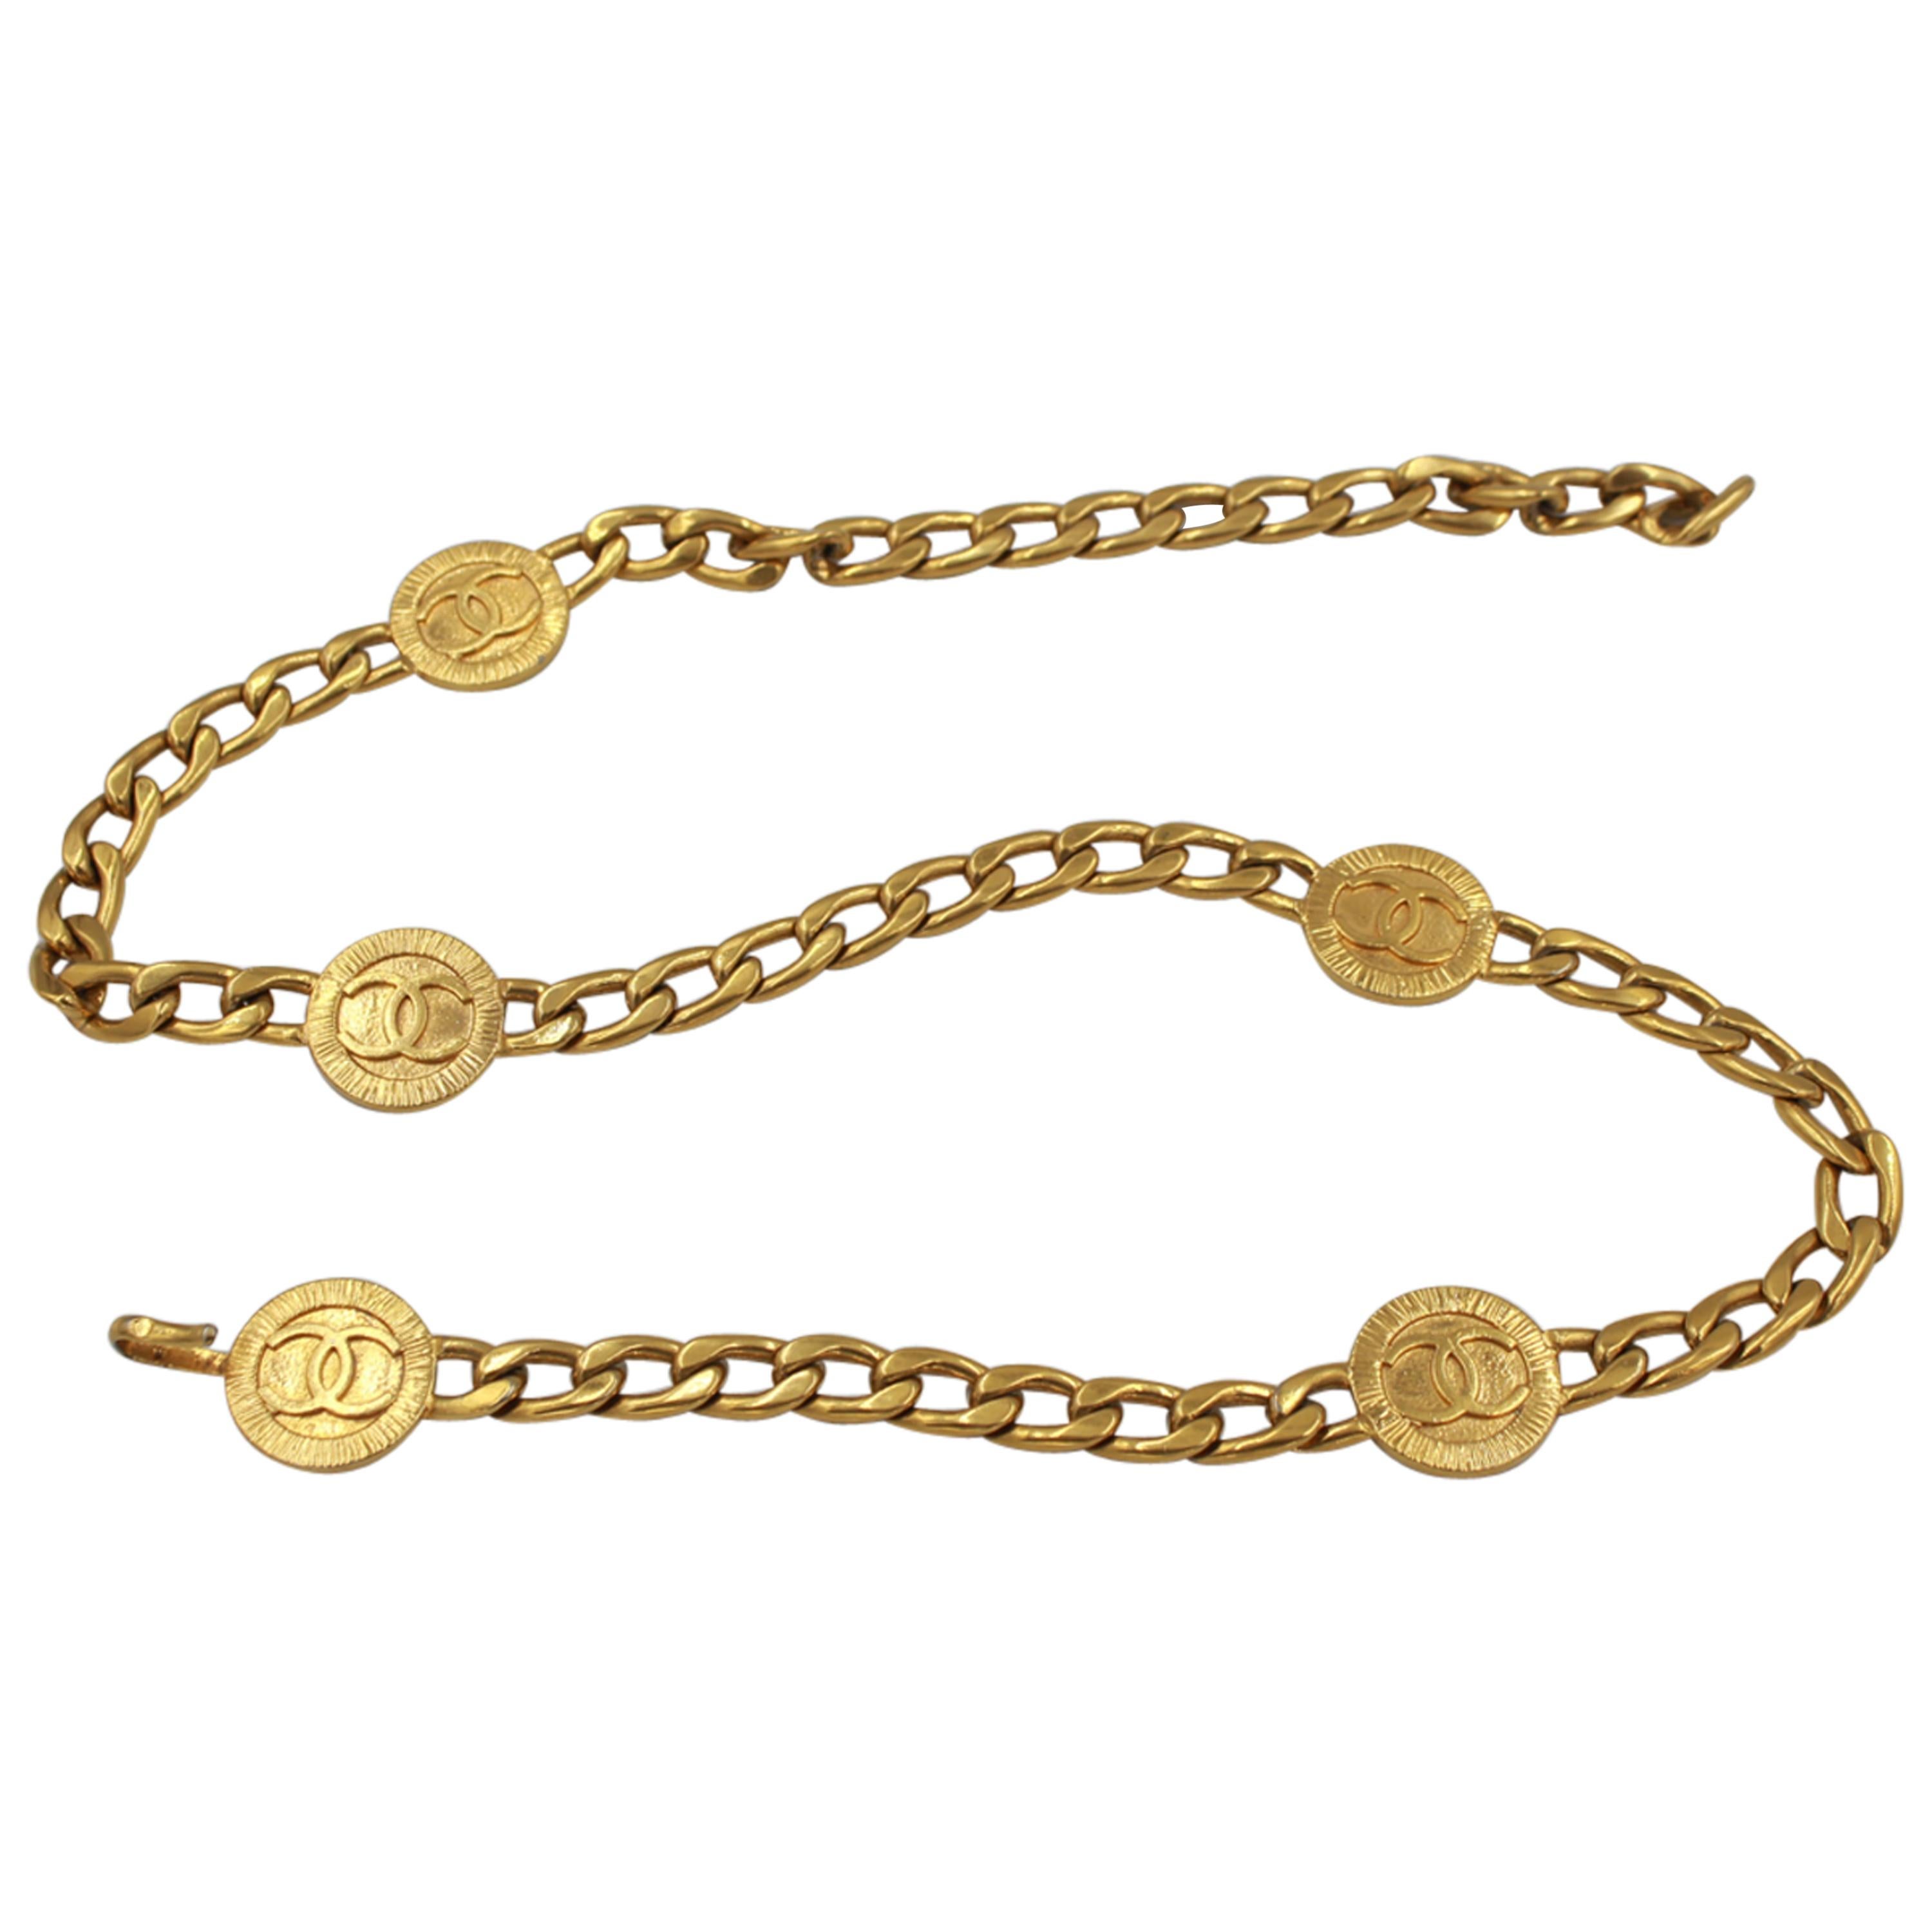 Chanel chain belt in gold metal double « C » For Sale